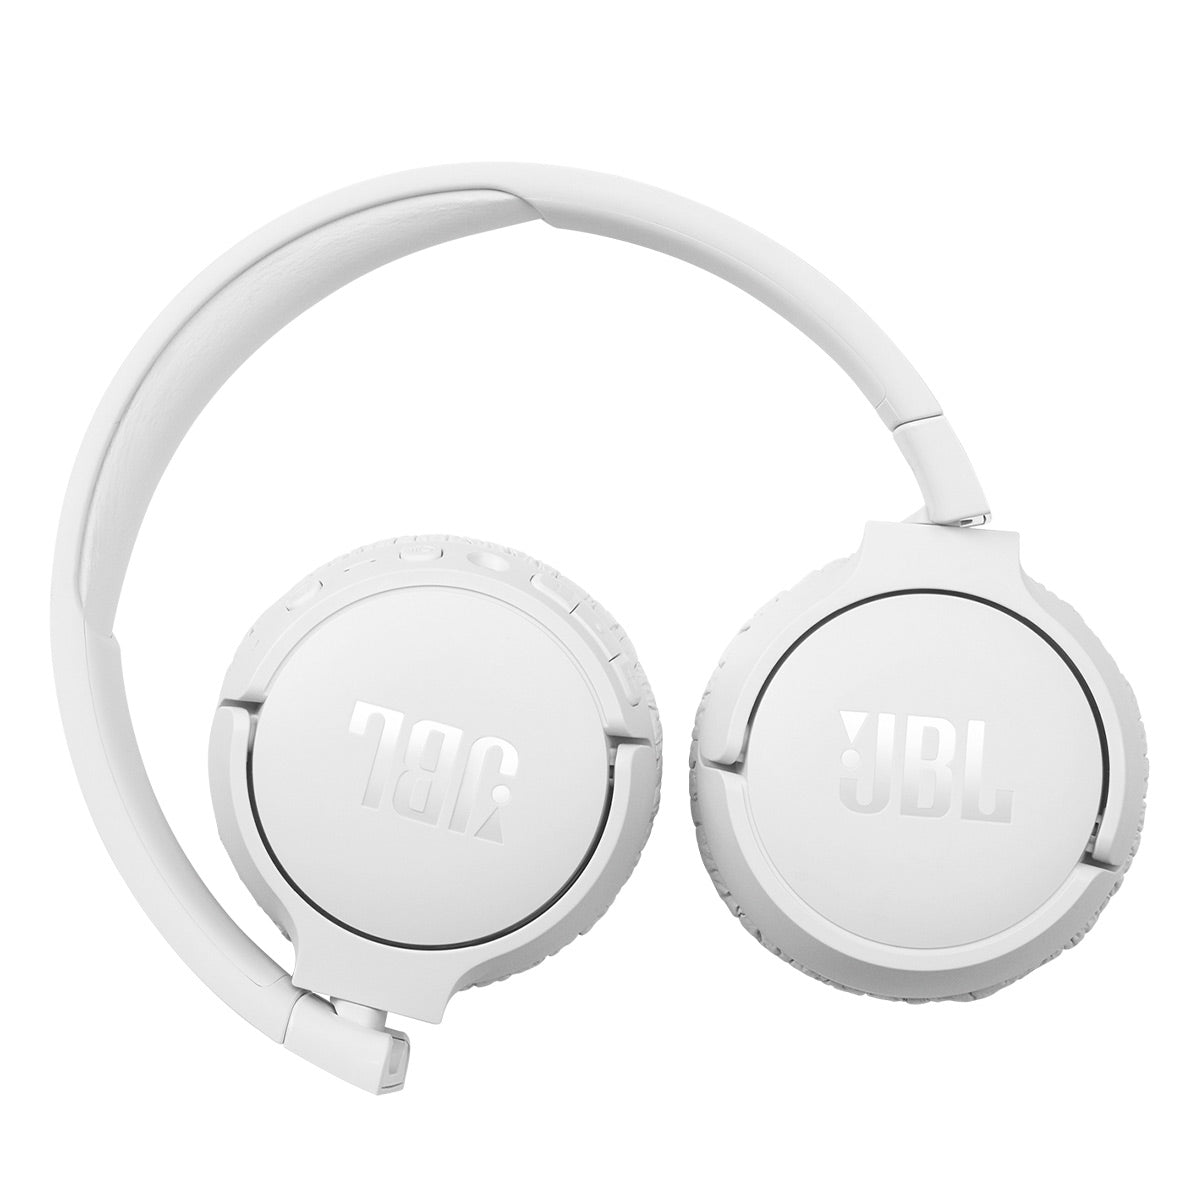 JBL Tune 660NC Wireless On-Ear Active Noise Cancelling Headphones (Blue)